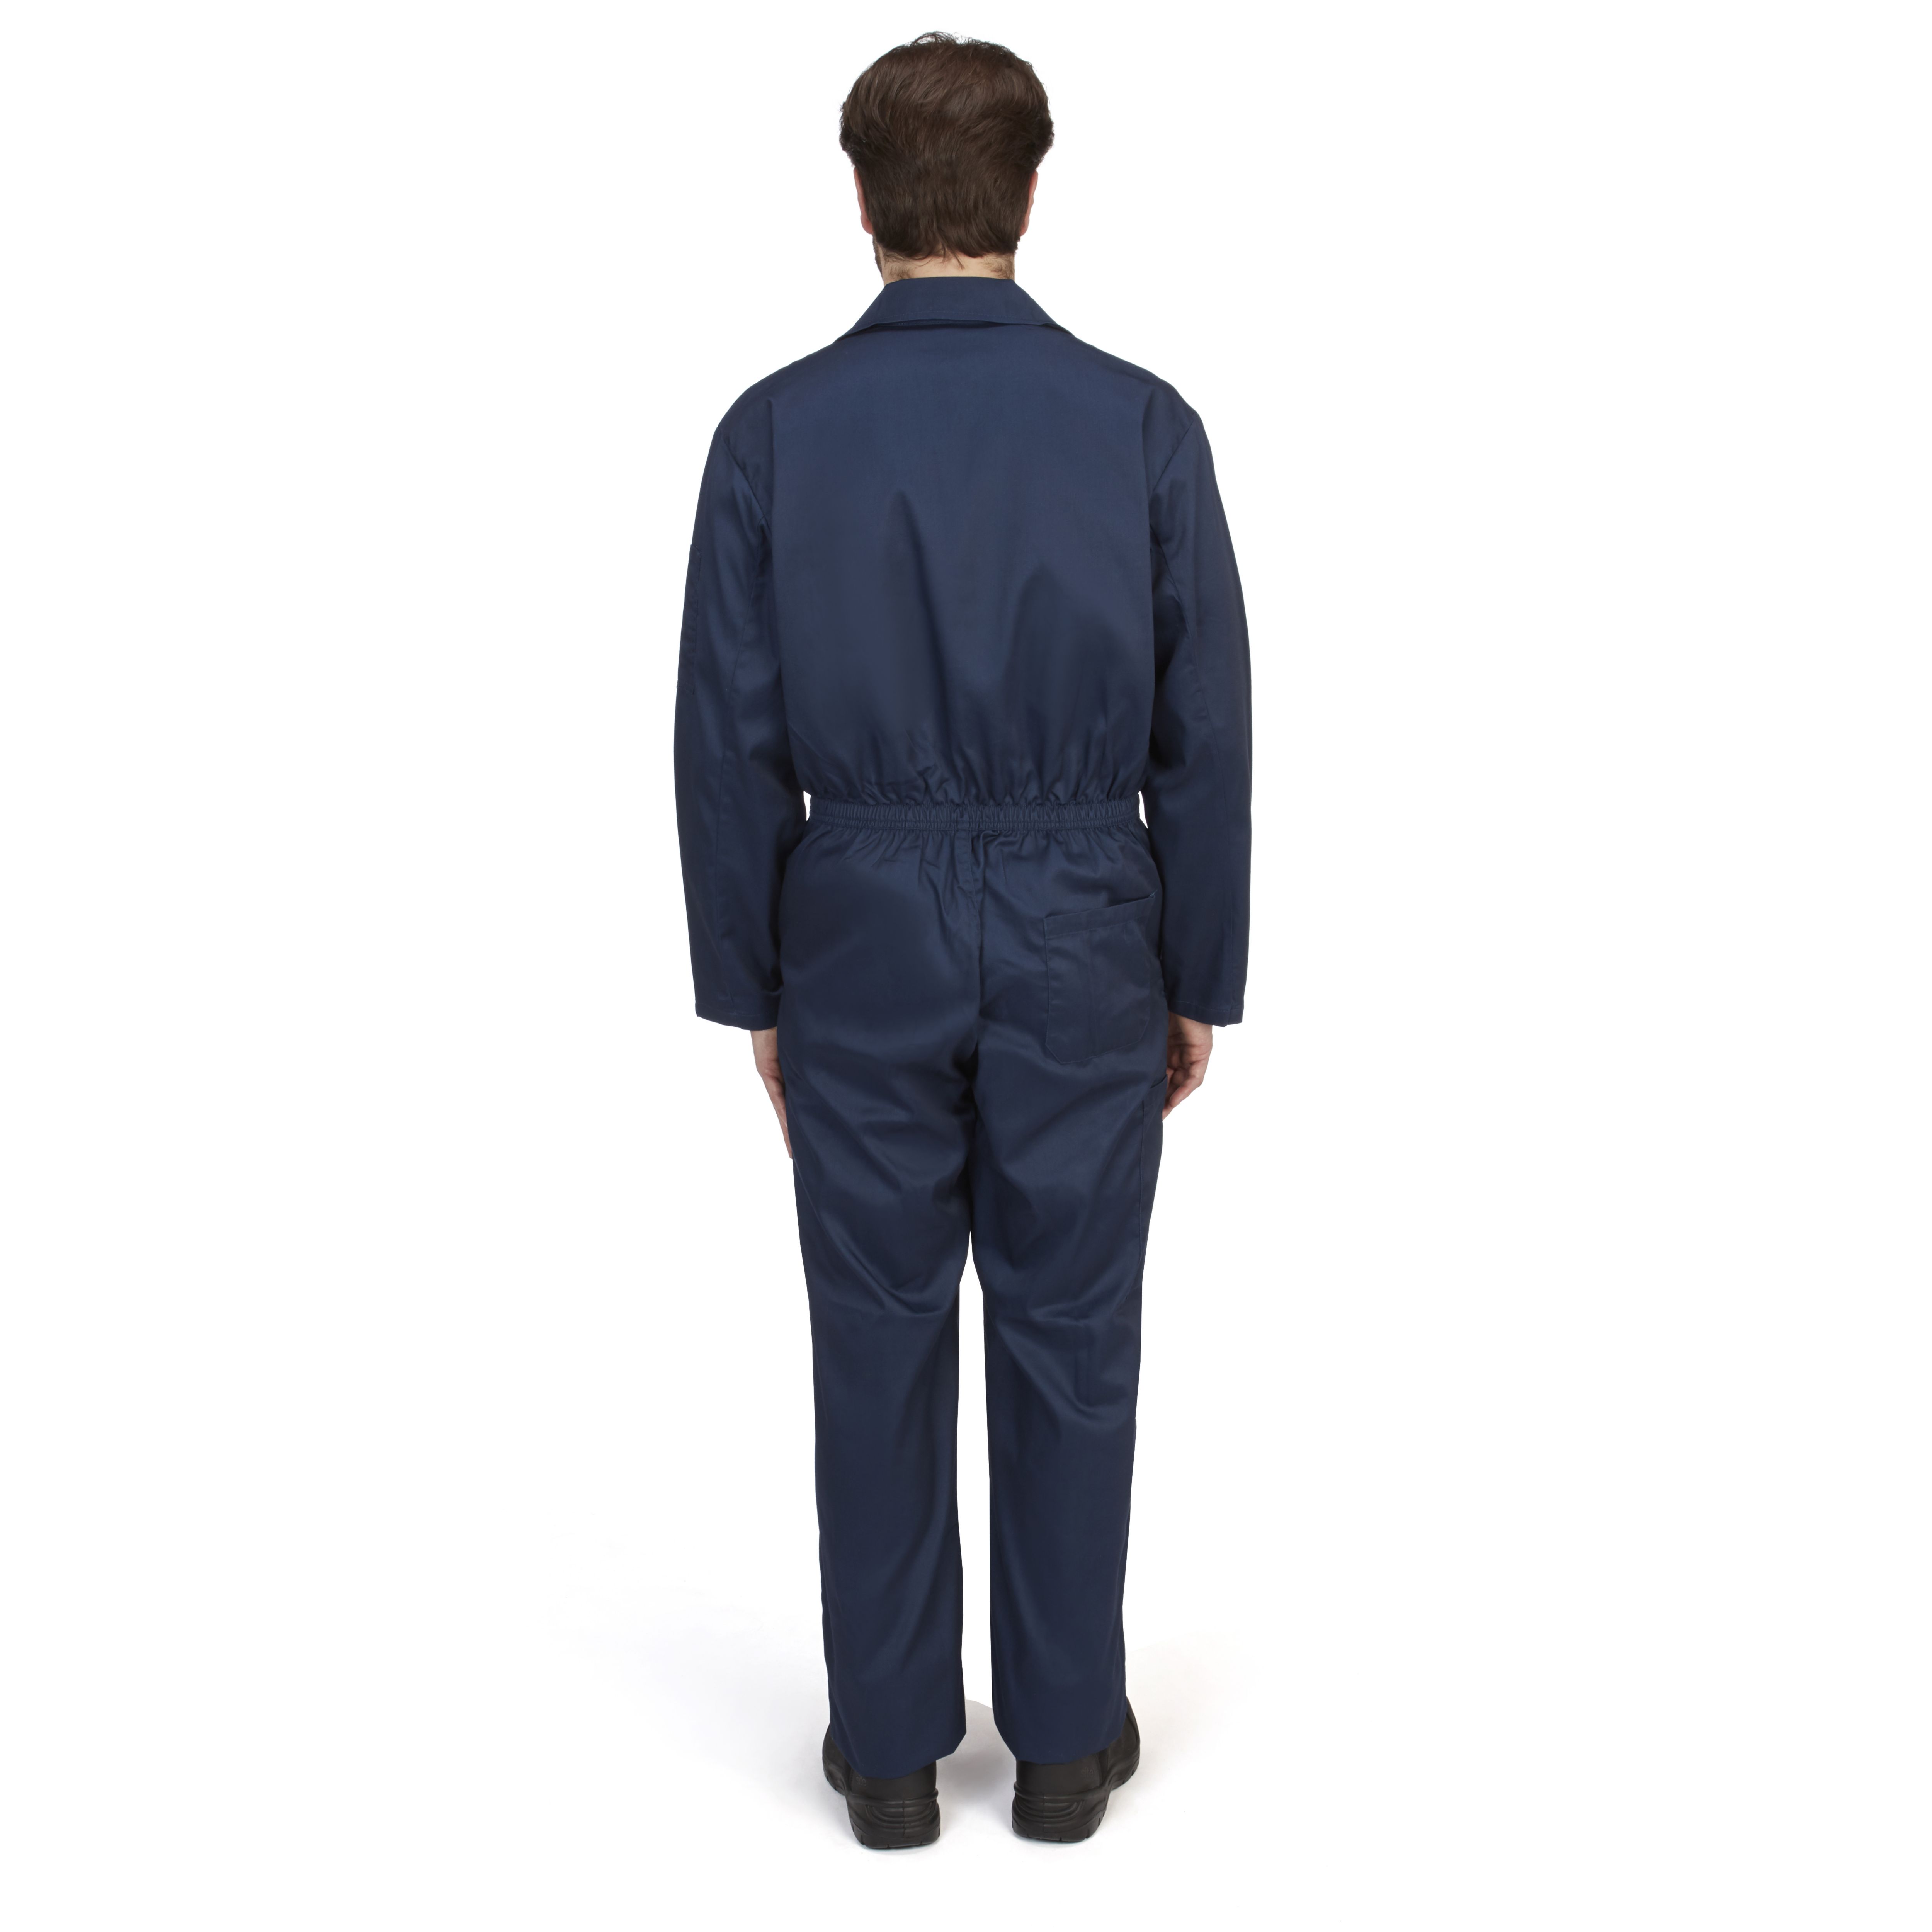 Navy blue Coverall X Large